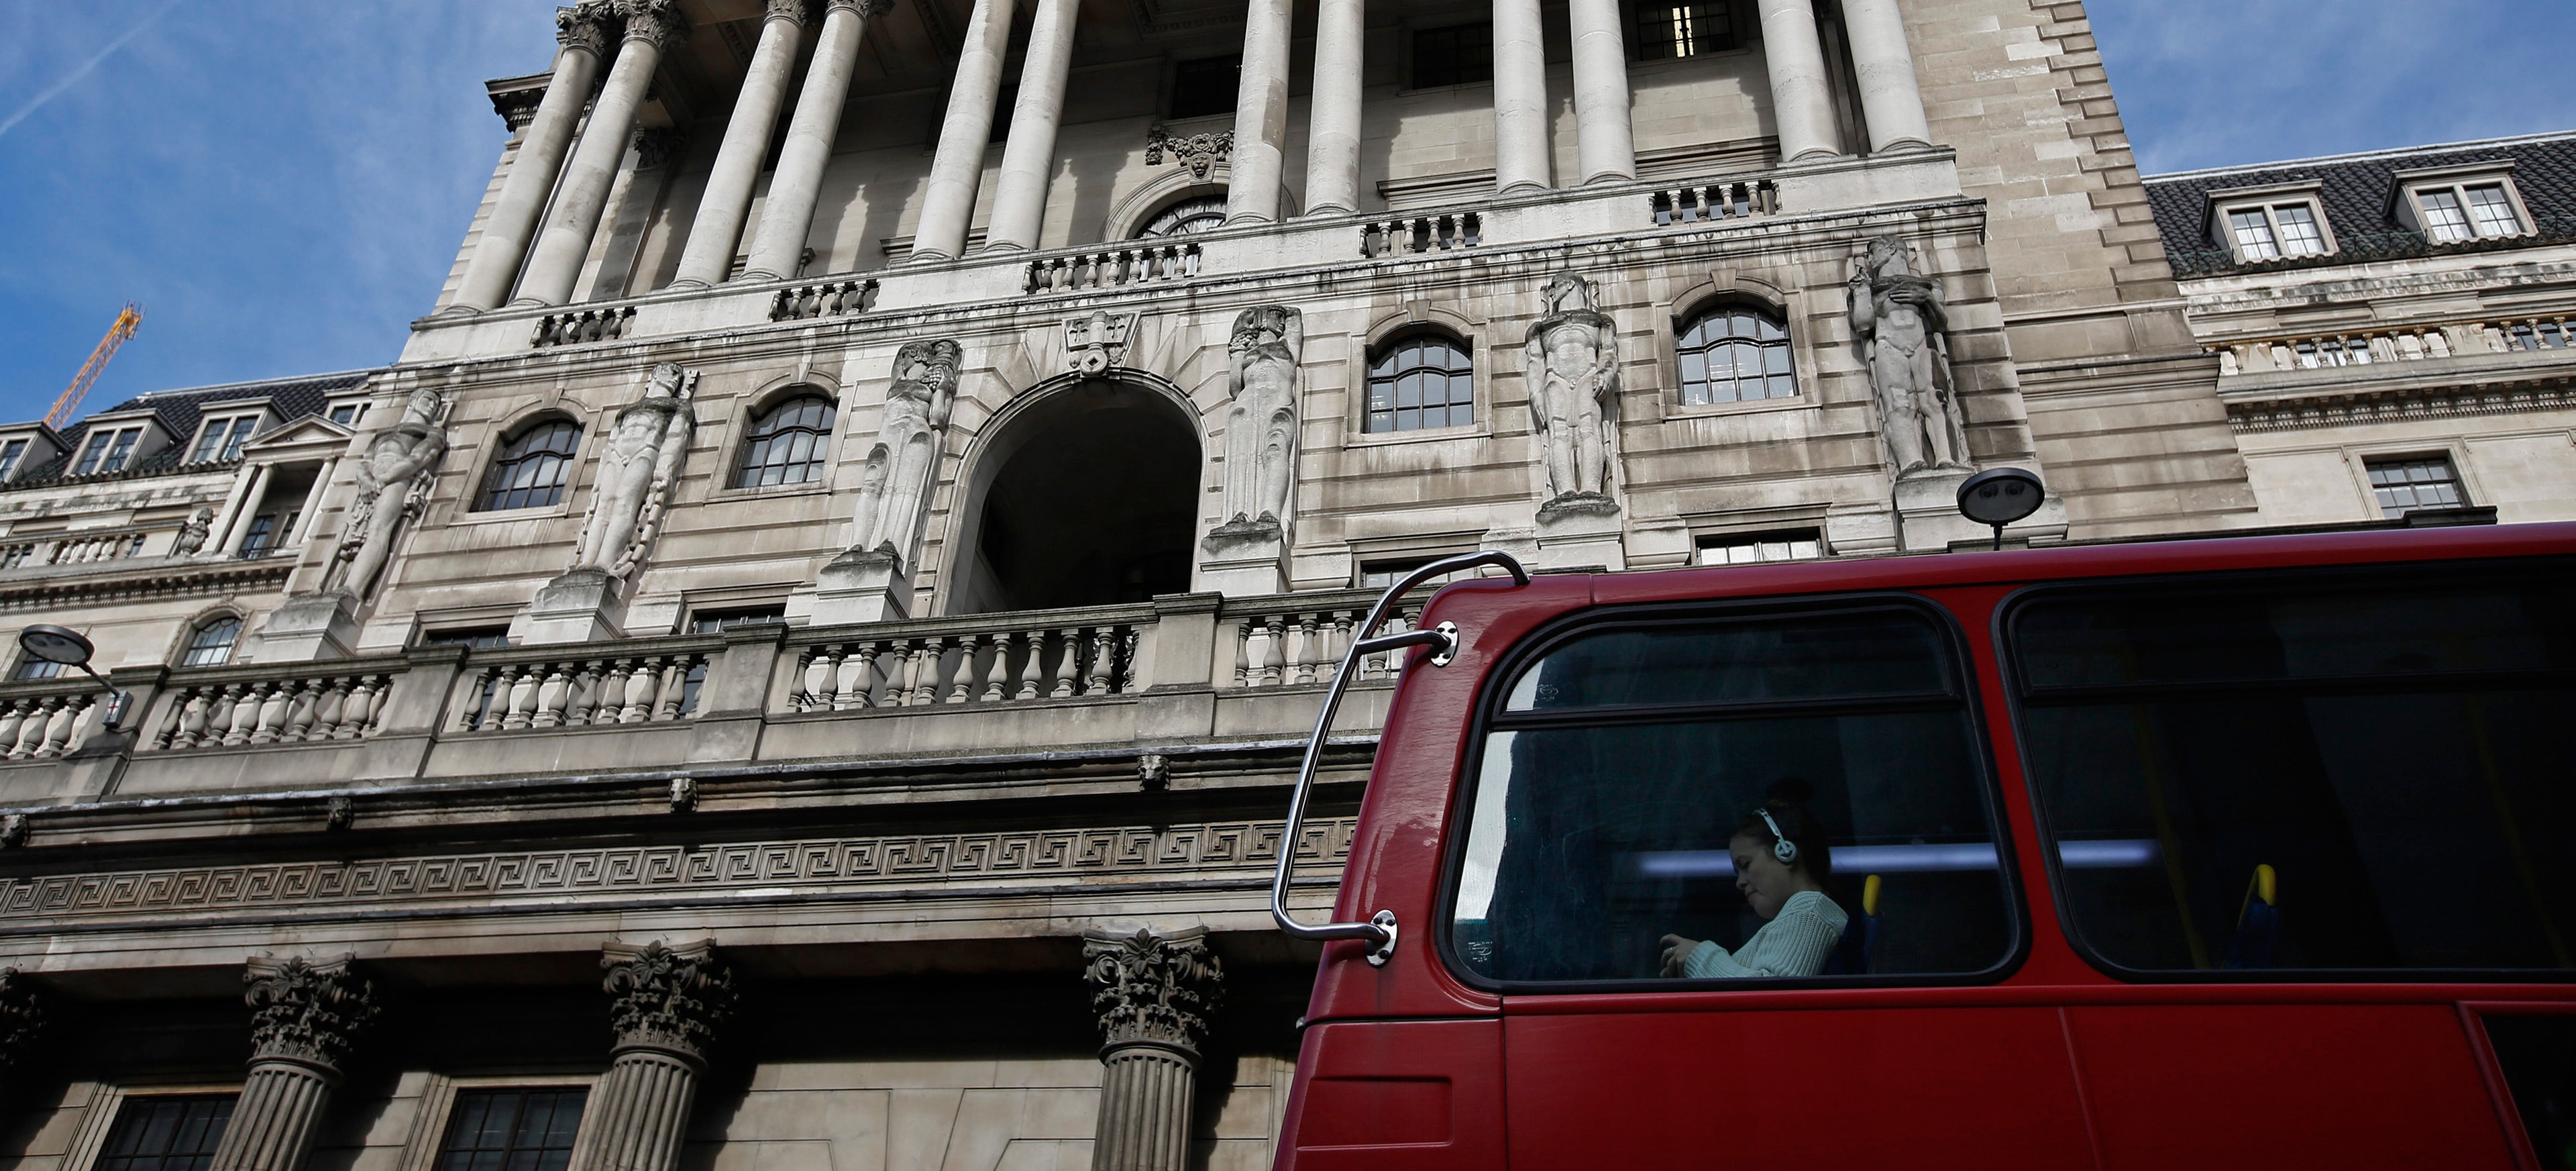 UK Regulators Reveal Financial Reforms Meant to Curb FX Market Abuse